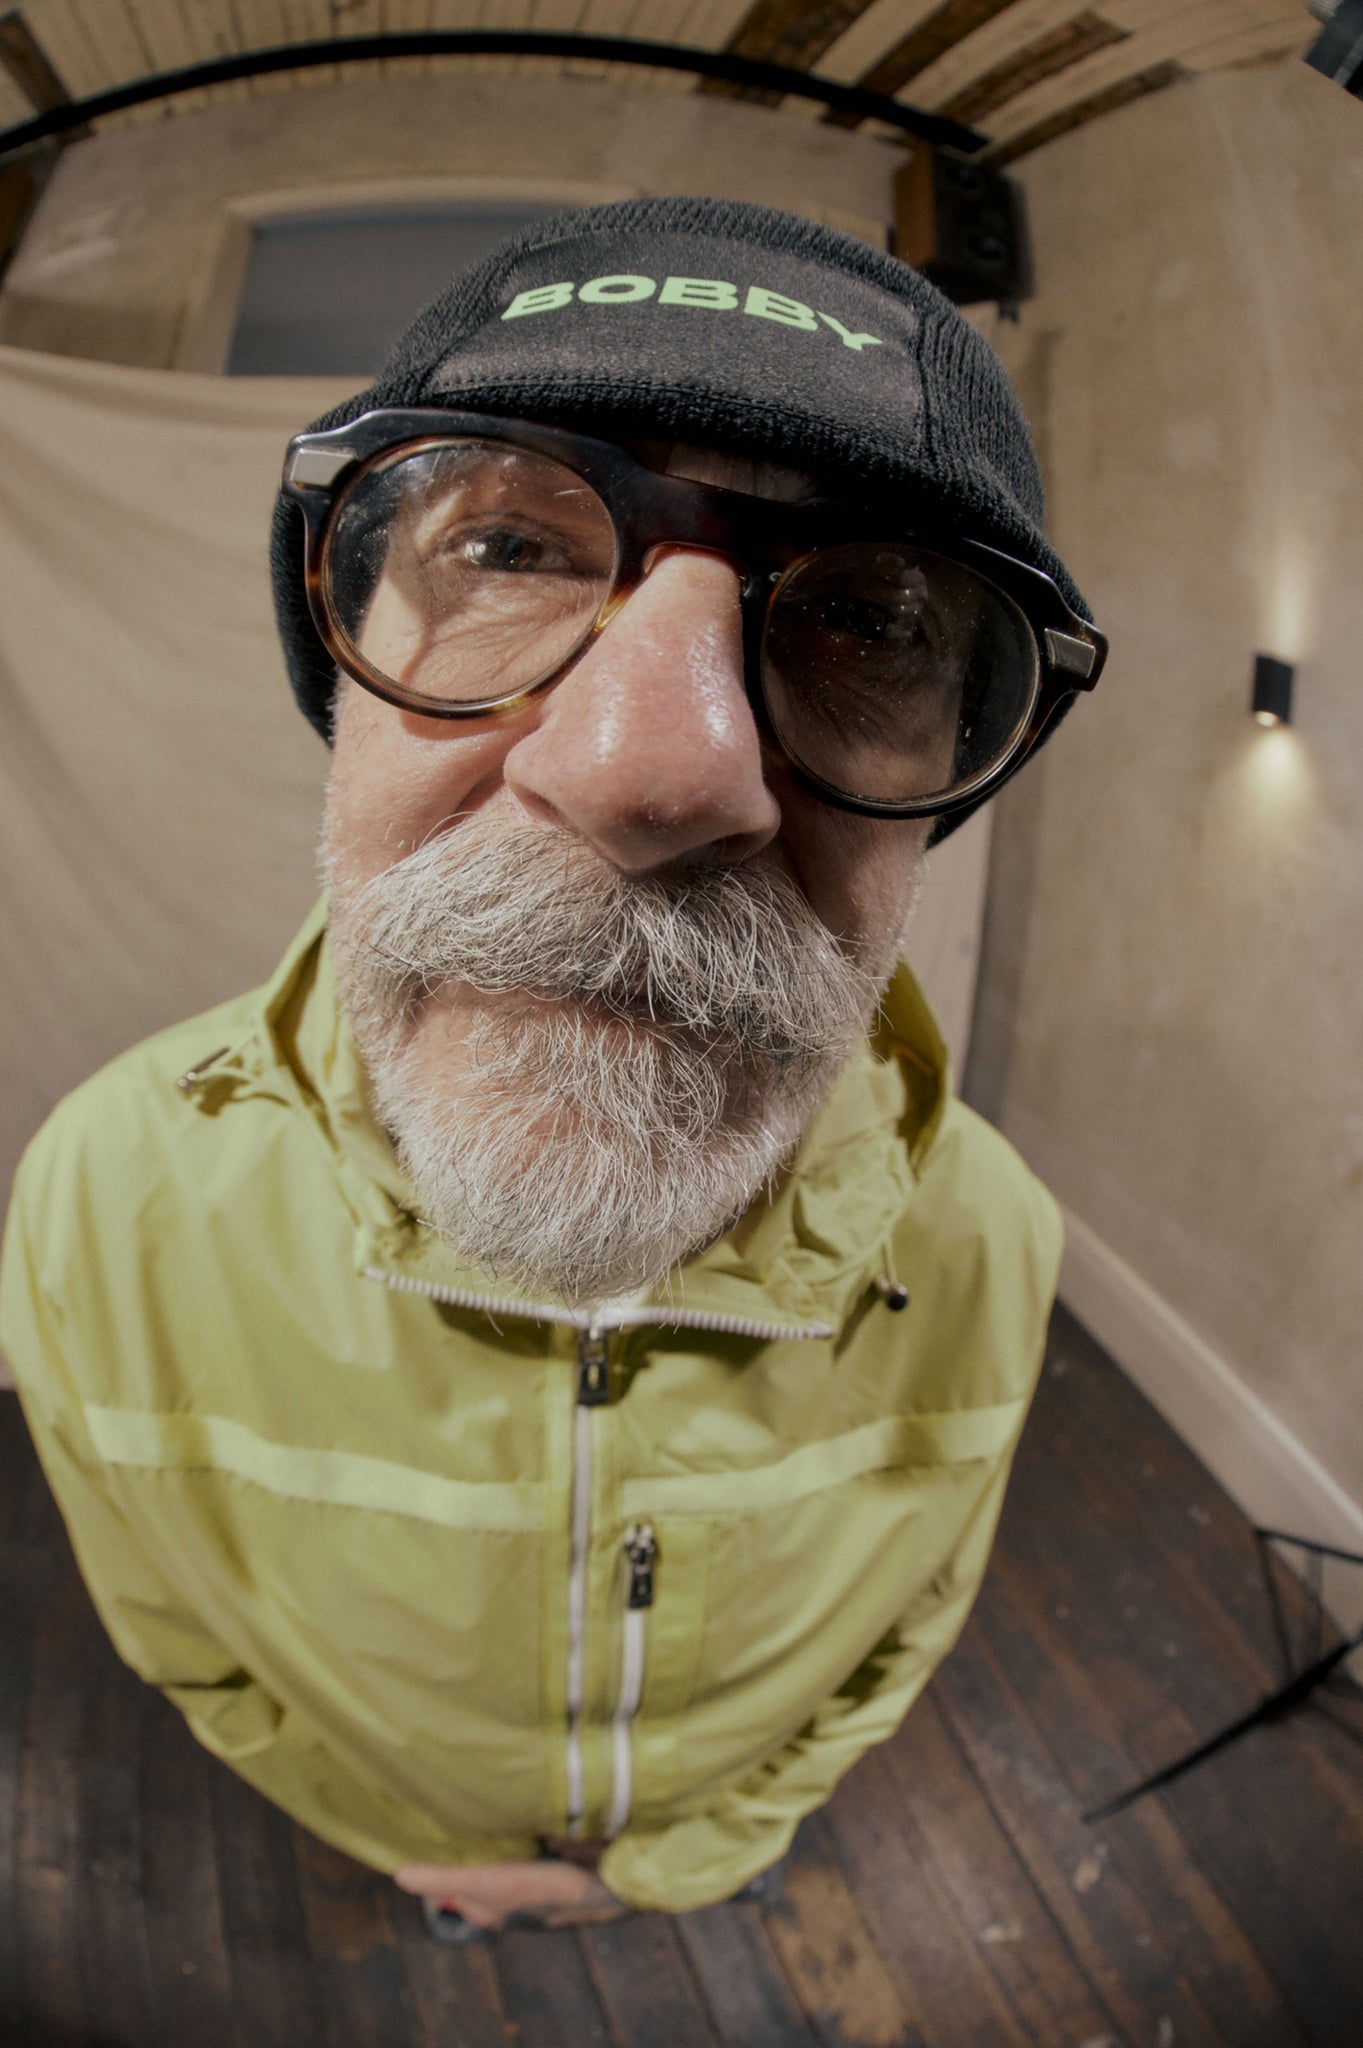 fisheye photography of an older man showing off his new winter accessories